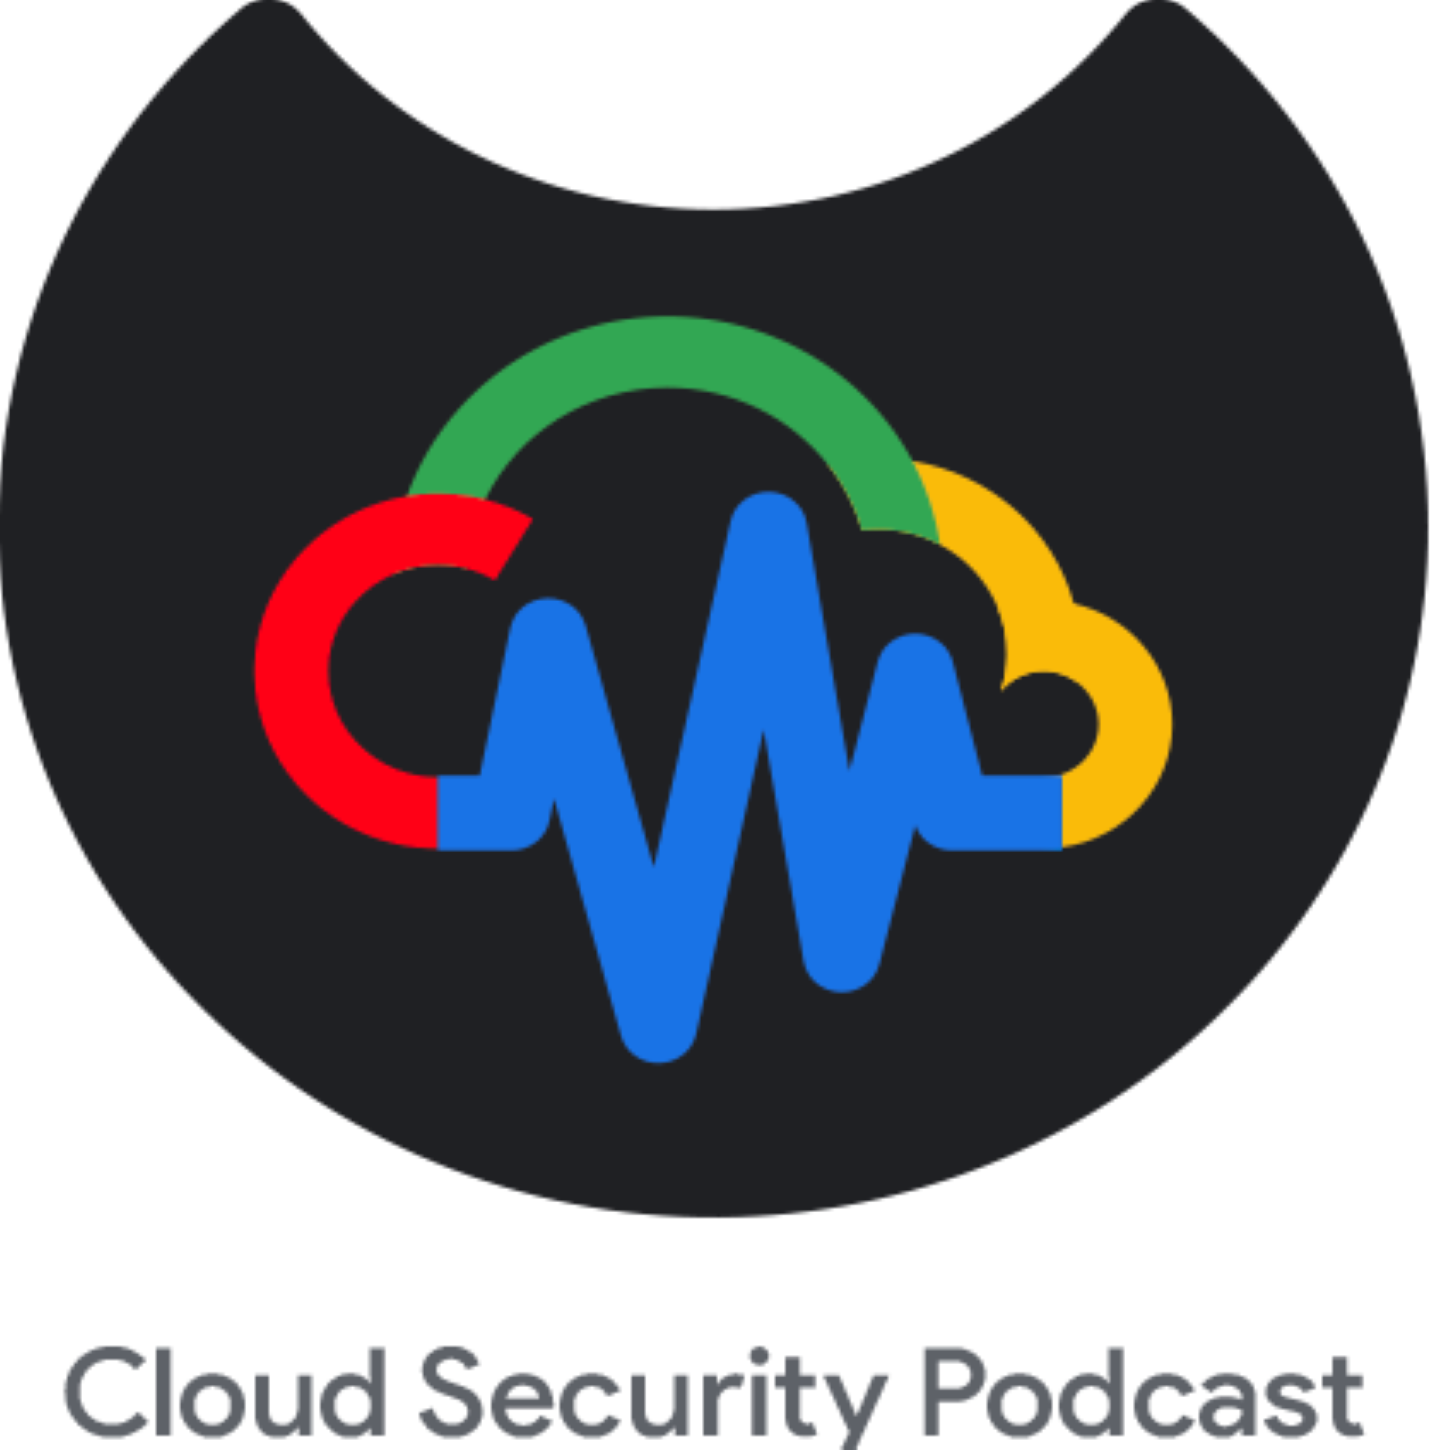 A highlight from EP138 Terraform for Security Teams: How to Use IaC to Secure the Cloud